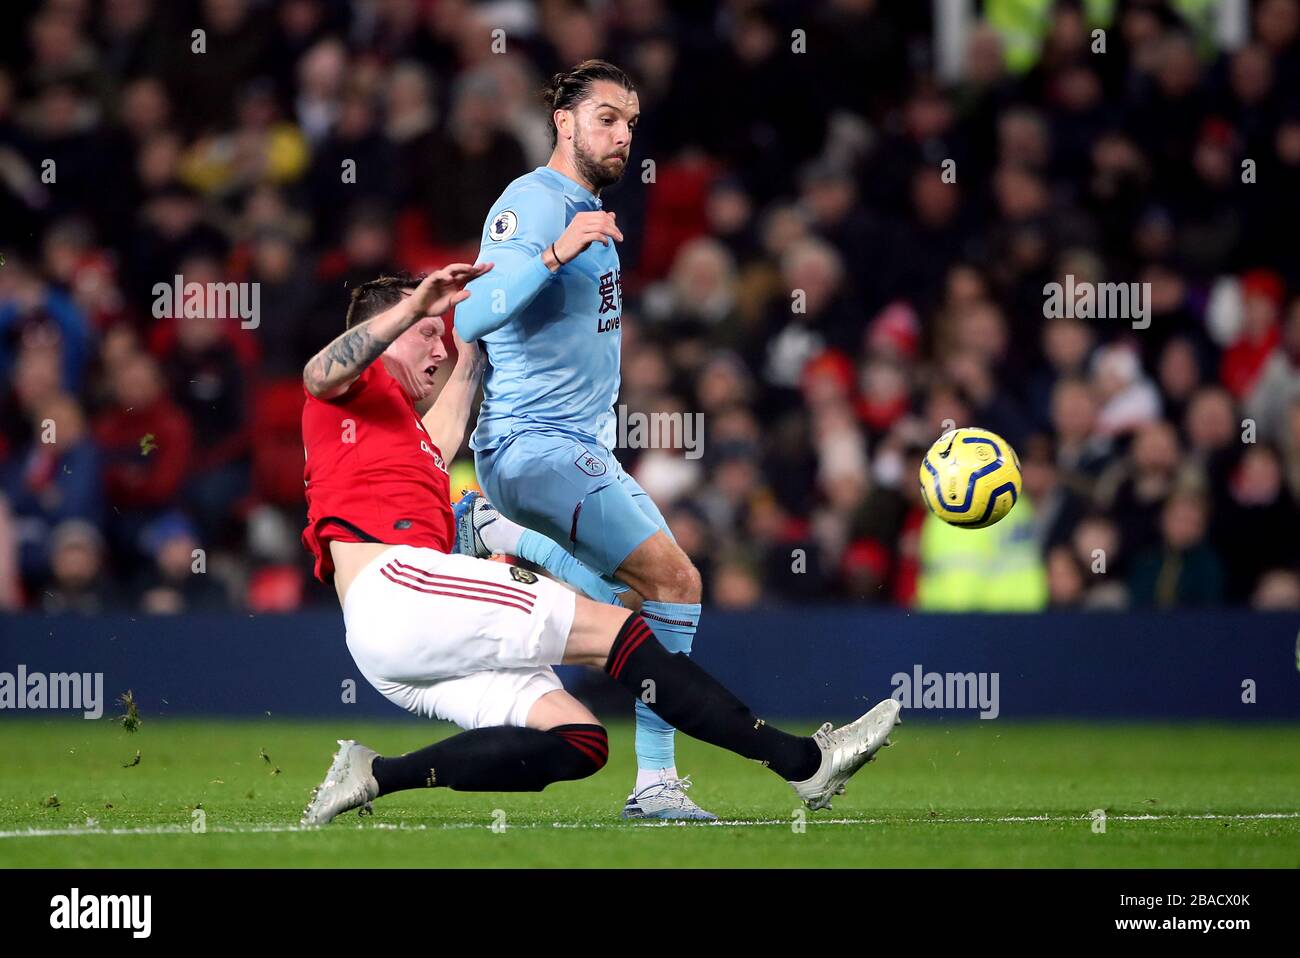 Manchester United's Phil Jones wins the ball ahead of Burnley’s Jay Rodriguez Stock Photo